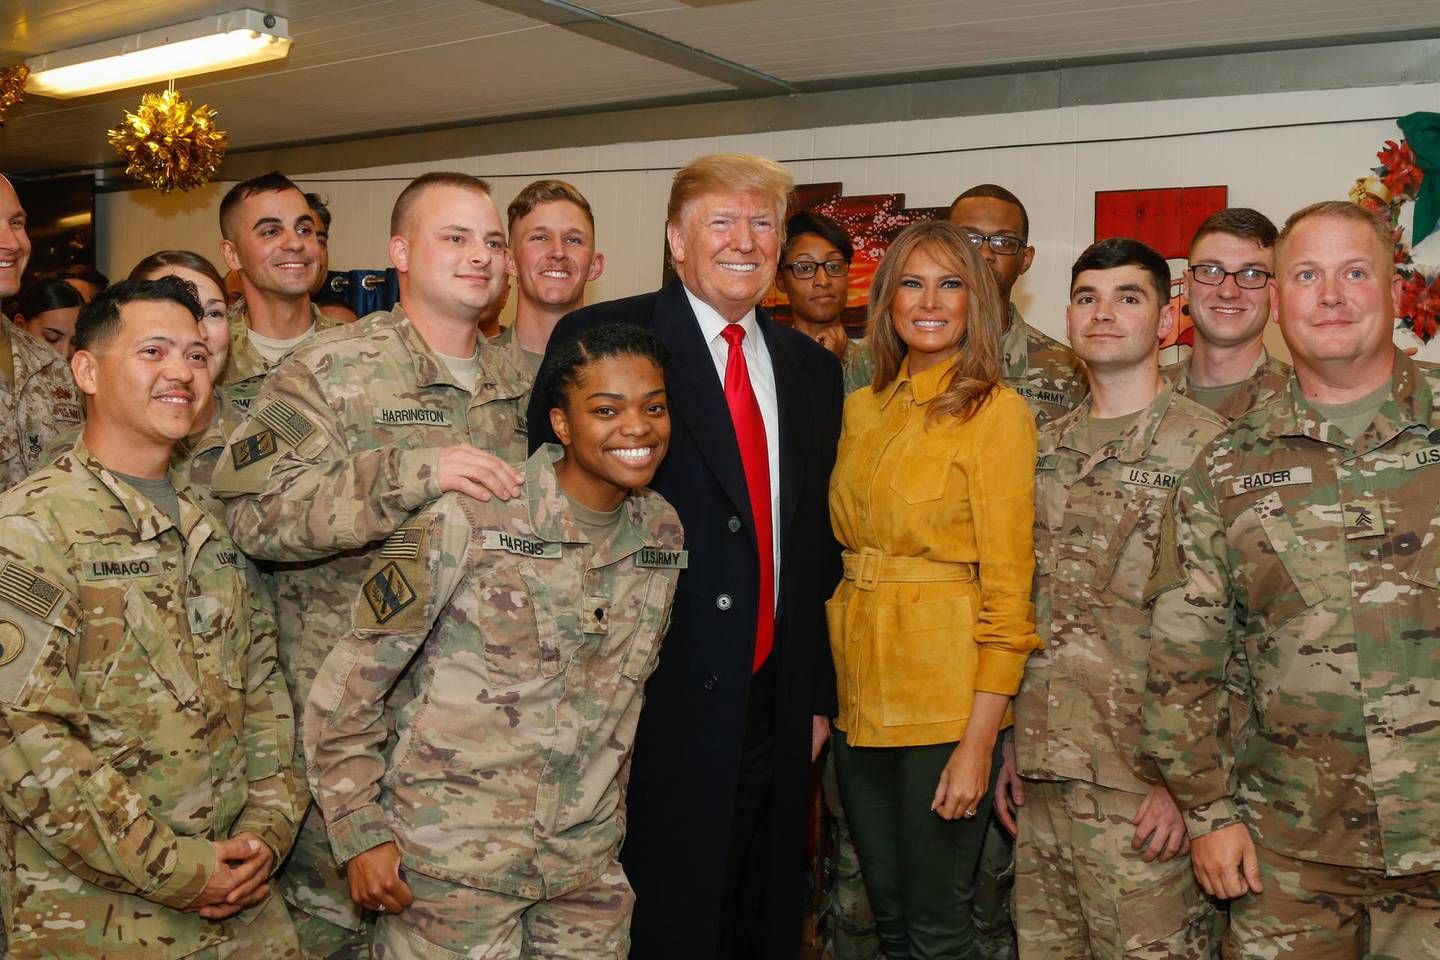 epa08112488 (FILE) - A handout photo made available by the US Army shows US President Donald J. Trump (C-L) and first lady Melania Trump (C-R) posing for a photo with service members assigned to Combined Joint Task Force – Operation Inherent Resolve (CJTF-OIR) during a troop visit to Al Asad Air Base, Iraq, 26 December 2018 (reissued 08 January 2020). According to Iranian state TV on 08 January 2020, Iran's Revolutionary Guard Crops (IRGC) launched a series of rockets targeting al Asad air base, one of the bases hosting US military troops in Iraq. The attack comes days after top Iranian General Qasem Soleimani, head of the IRGC's Quds force, was killed by a US drone strike in Baghdad.  EPA/Leland White / US ARMY HANDOUT  HANDOUT EDITORIAL USE ONLY/NO SALES